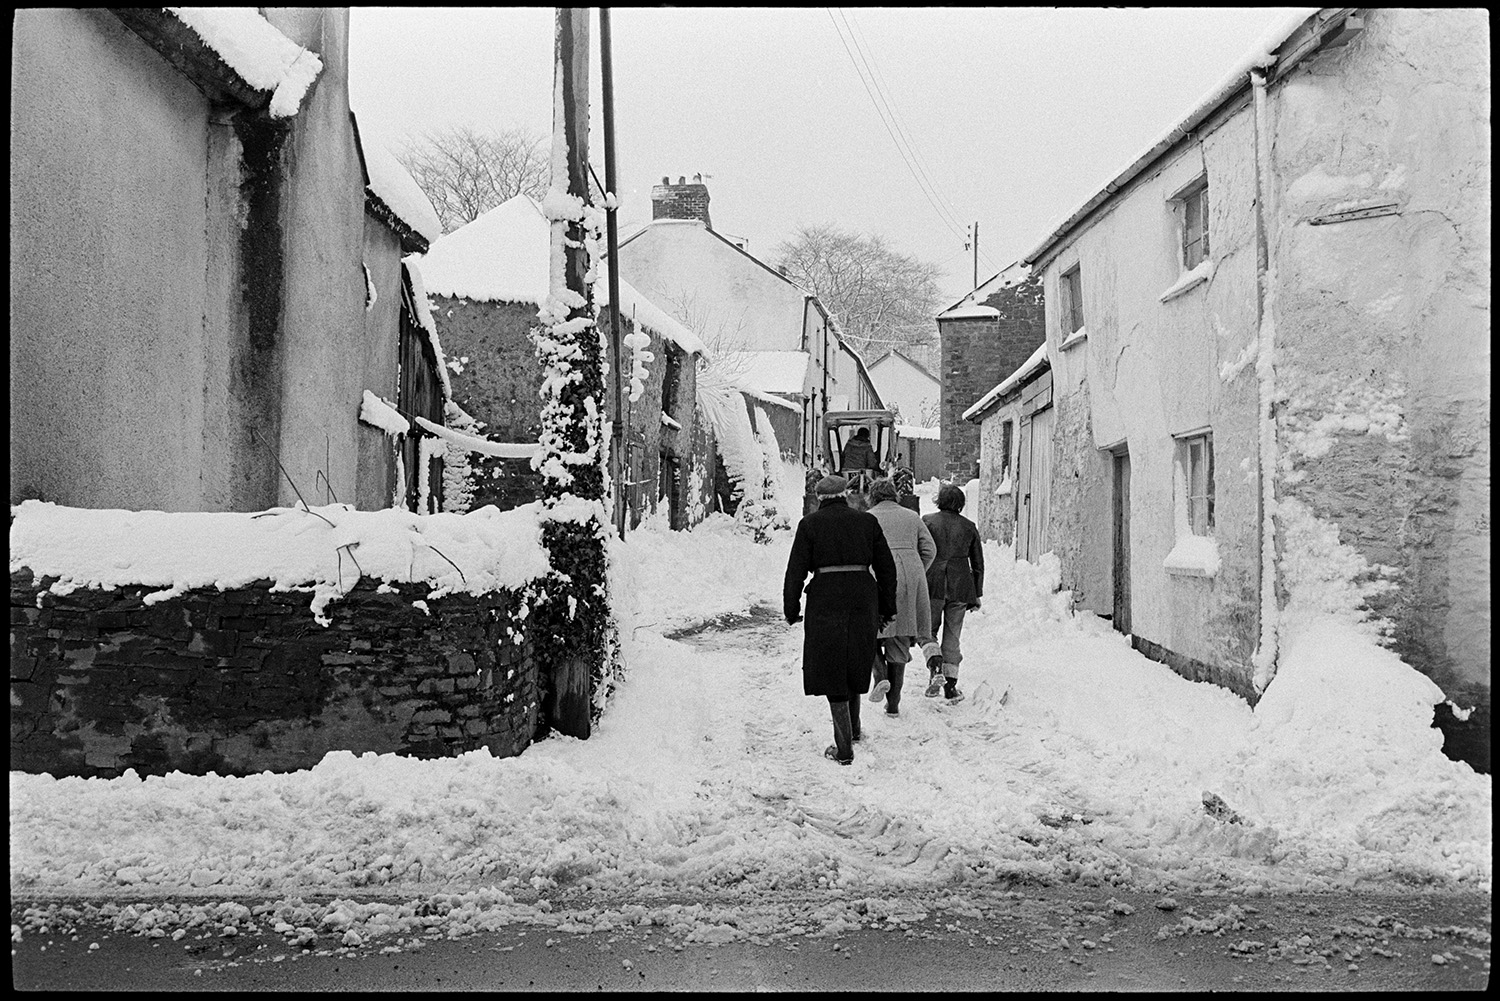 Snow, street scene with people clearing up. 
[People going to clear snow from a street in Beaford. A tractor can be seen further up the street.]